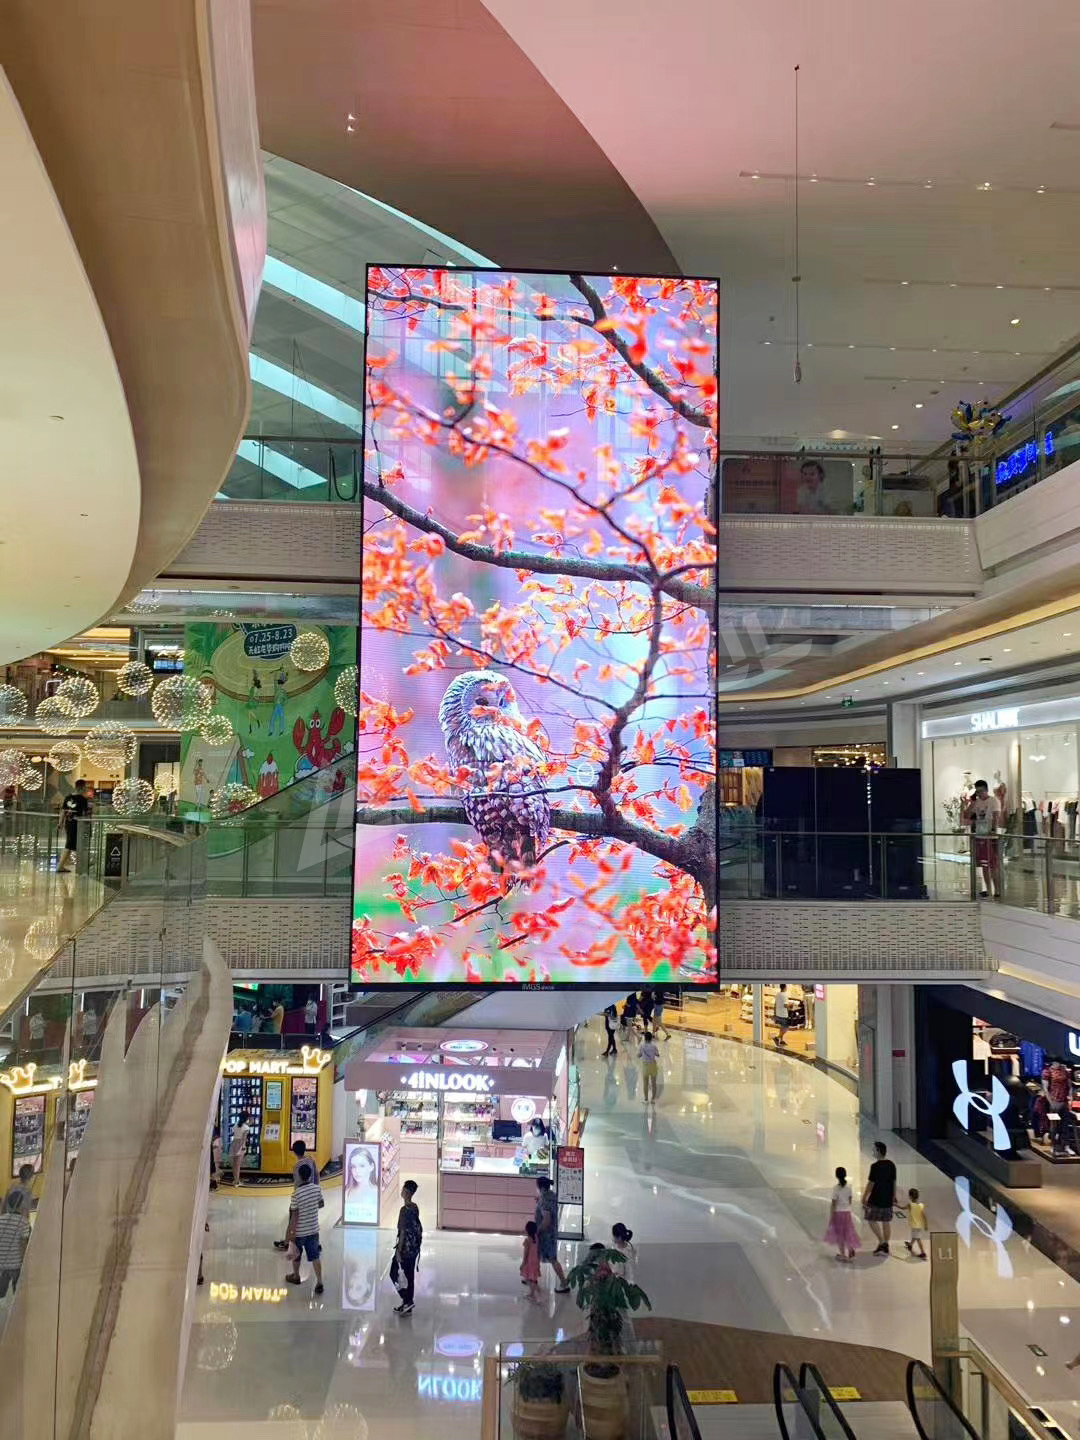 Advantages of LED Transparent Display Screens in LED Showcase Displays?